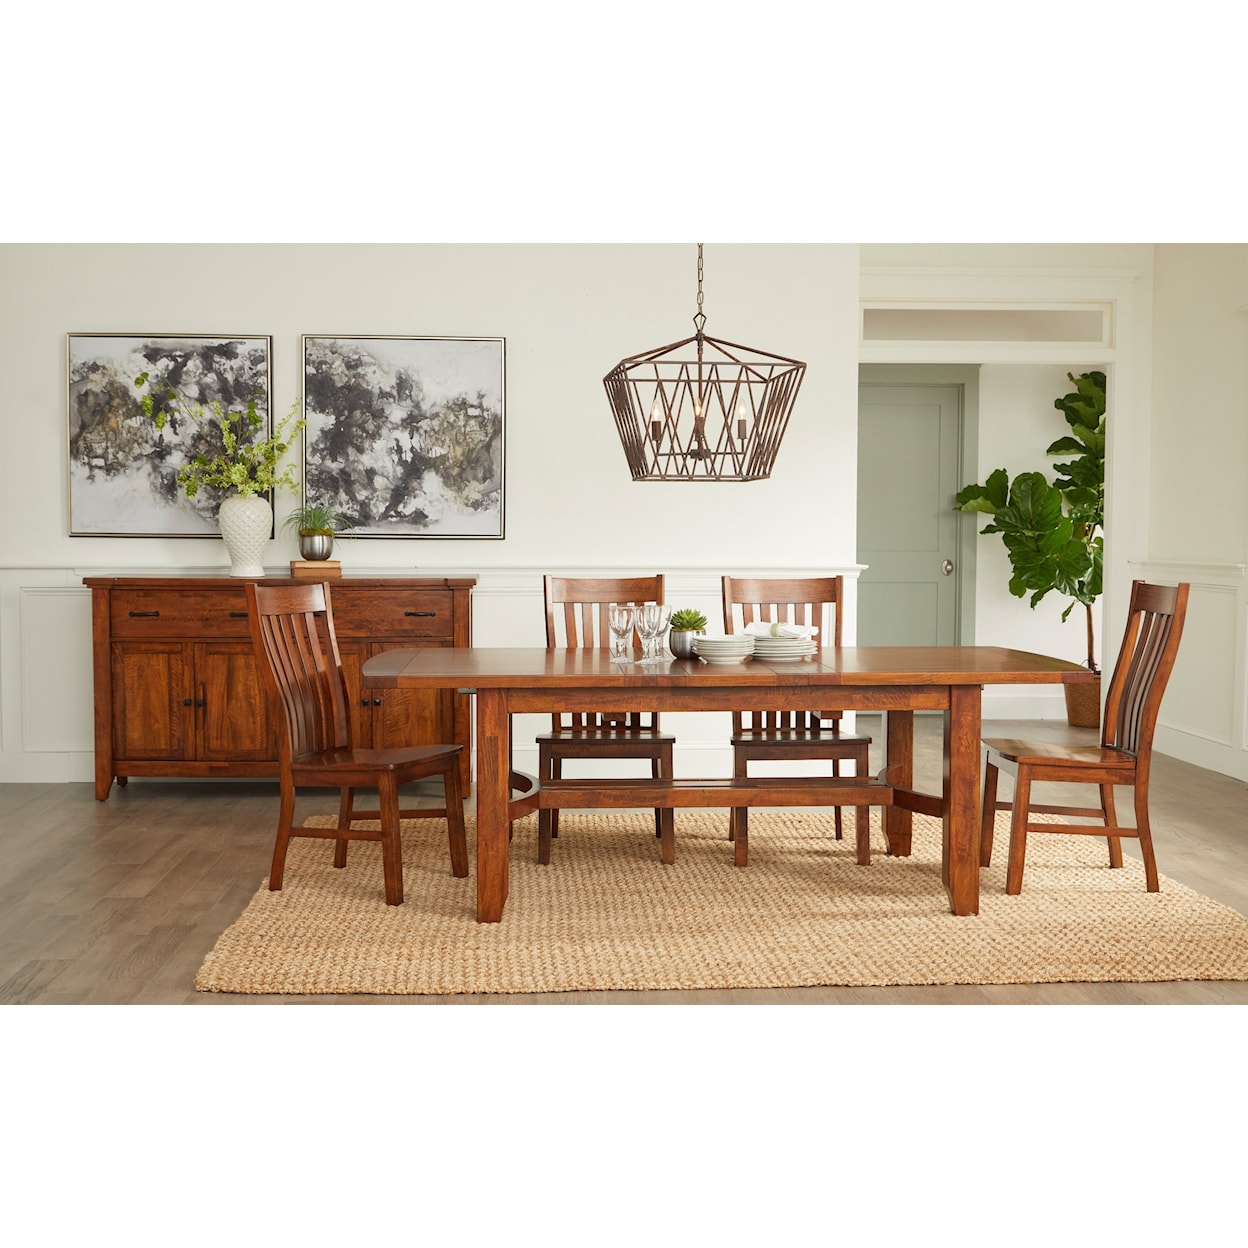 Napa Furniture Design Whistler Retreat Dining Table with Extension